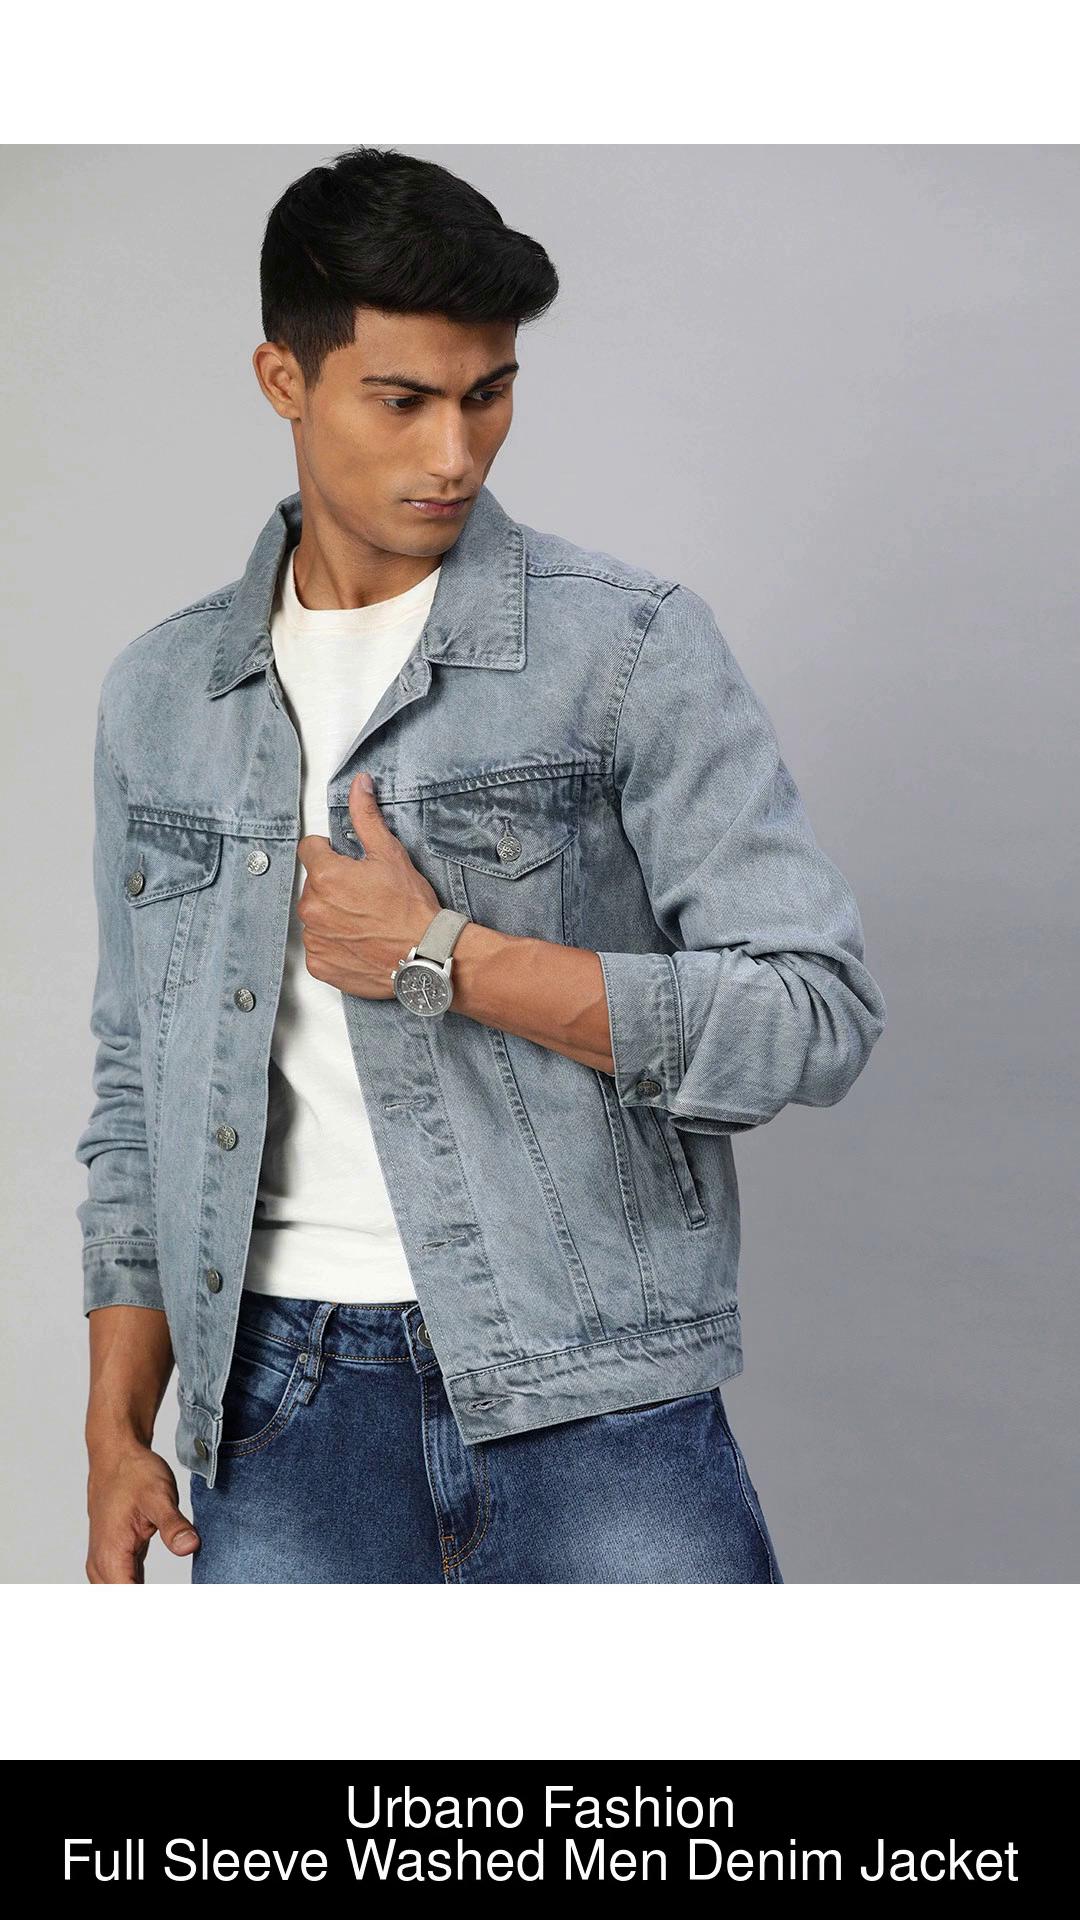 Buy online Dark Blue Solid Denim Jacket from Jackets for Men by Ftx for  ₹899 at 50% off